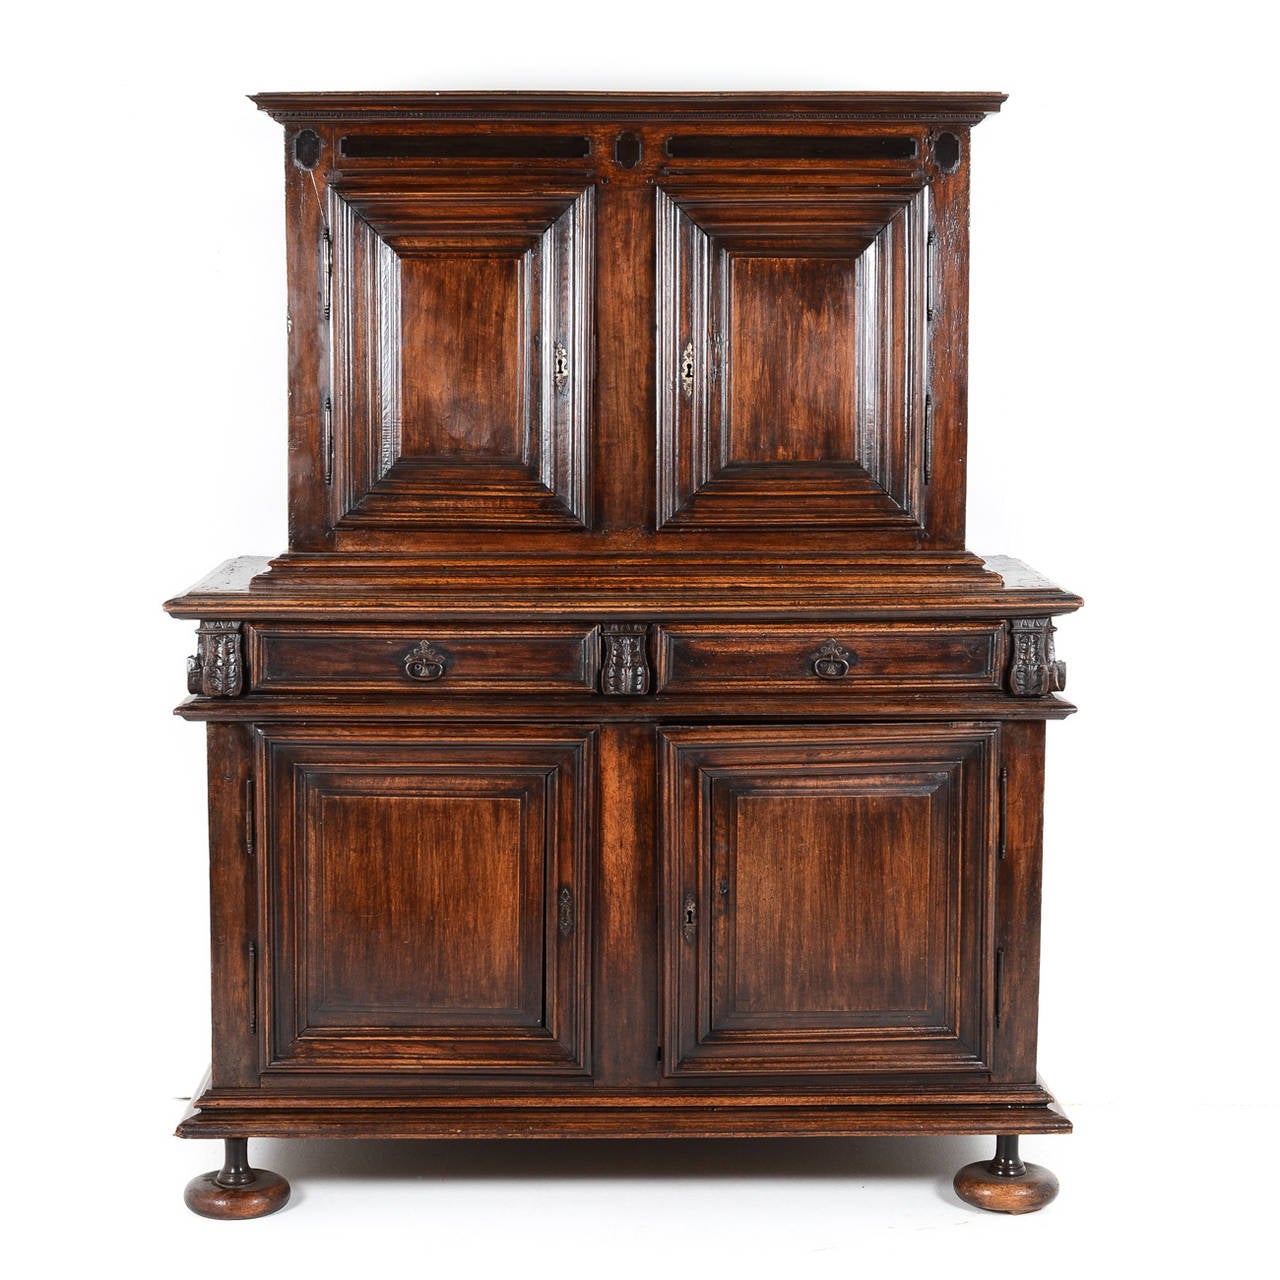 Solid walnut buffet deux corps cabinet from Italy, circa 1700. In superior original condition.